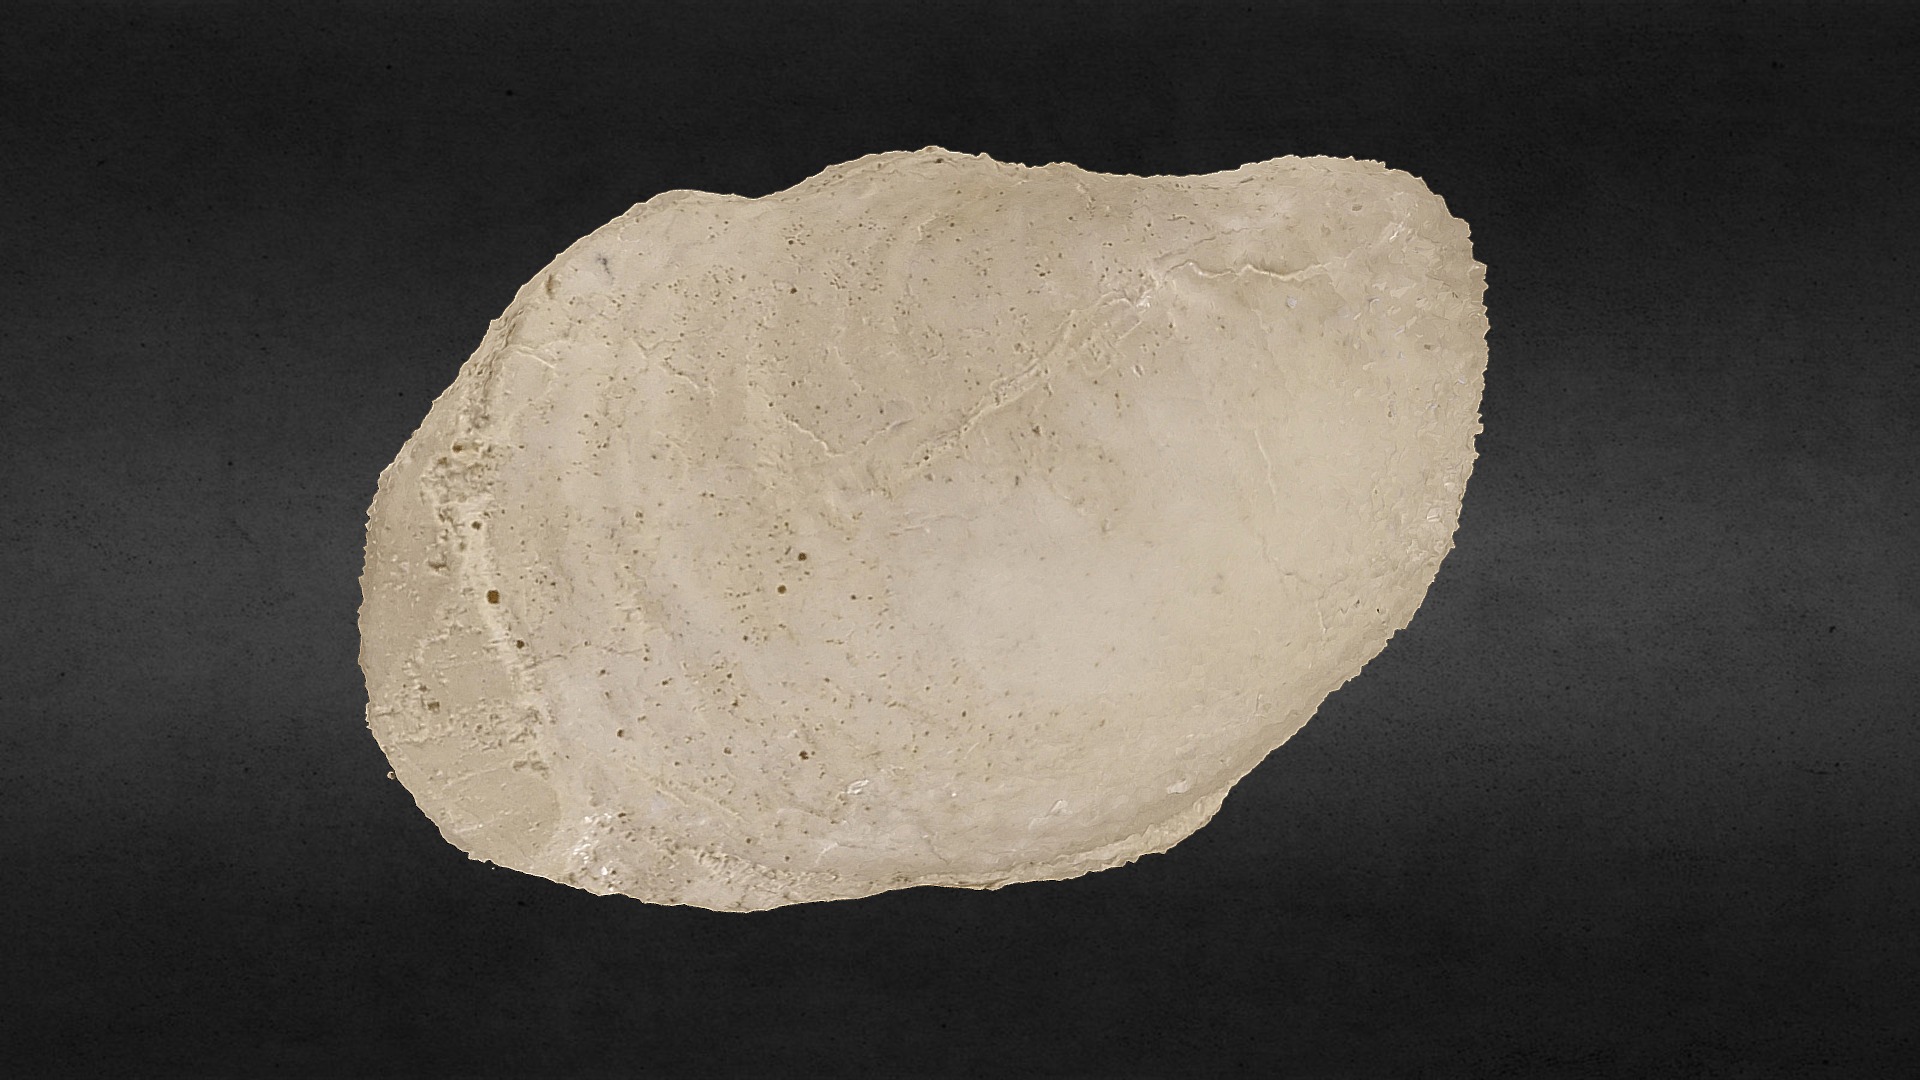 3D model Inoceramus typica Whitfield USNM 12261 - This is a 3D model of the Inoceramus typica Whitfield USNM 12261. The 3D model is about a white rock on a black background.